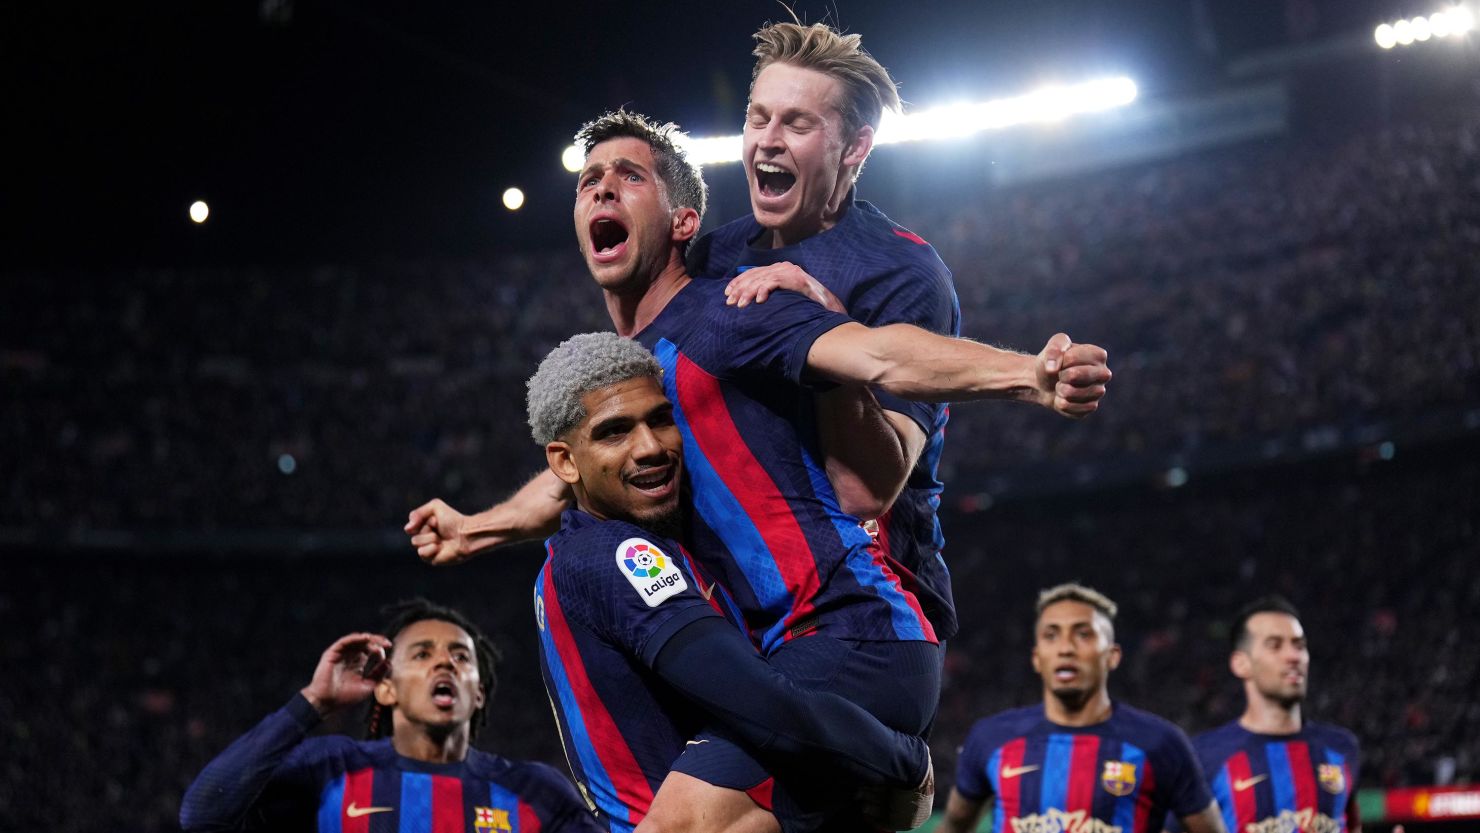 Barcelona players celebrate during their match against Real Madrid on Sunday.